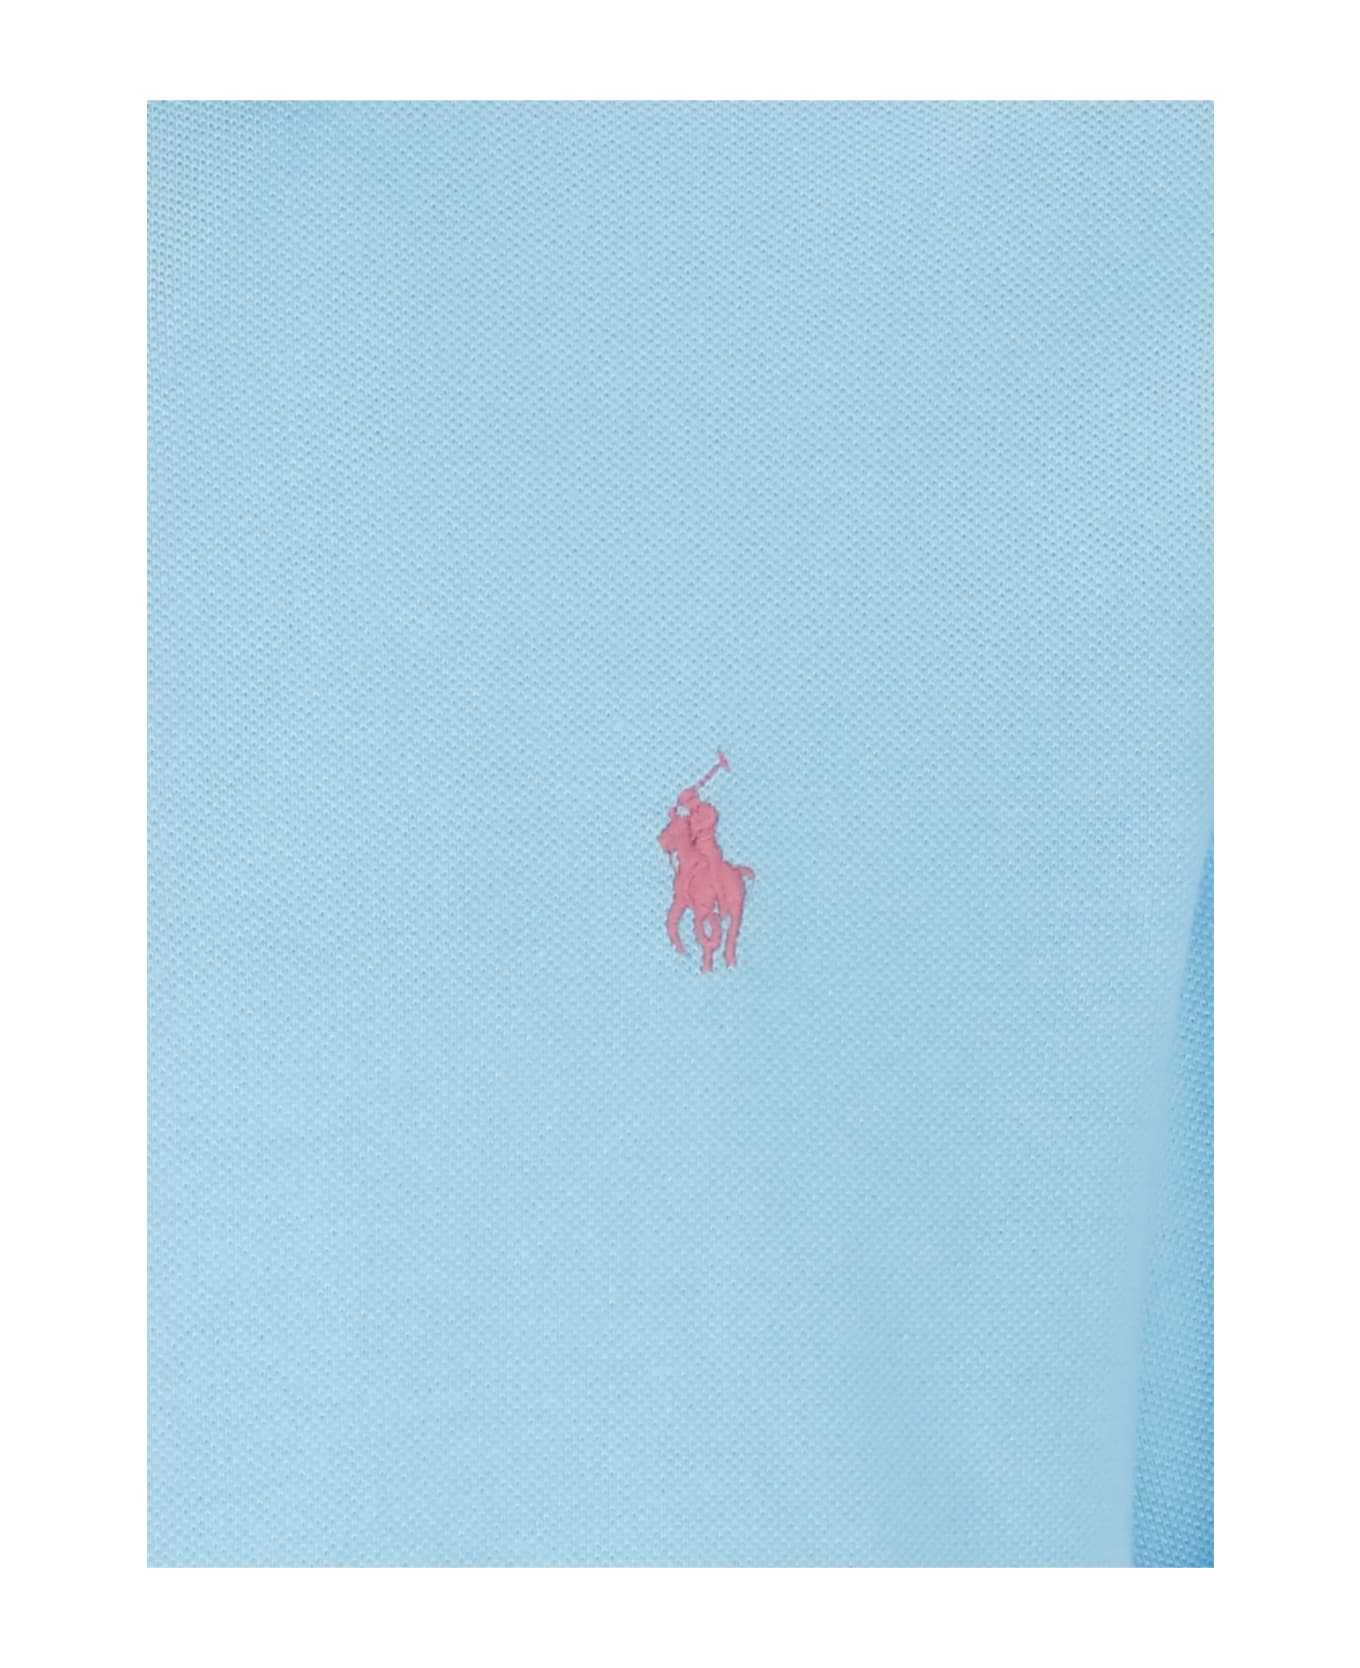 Ralph Lauren Polo Shirt With Pony - Blue